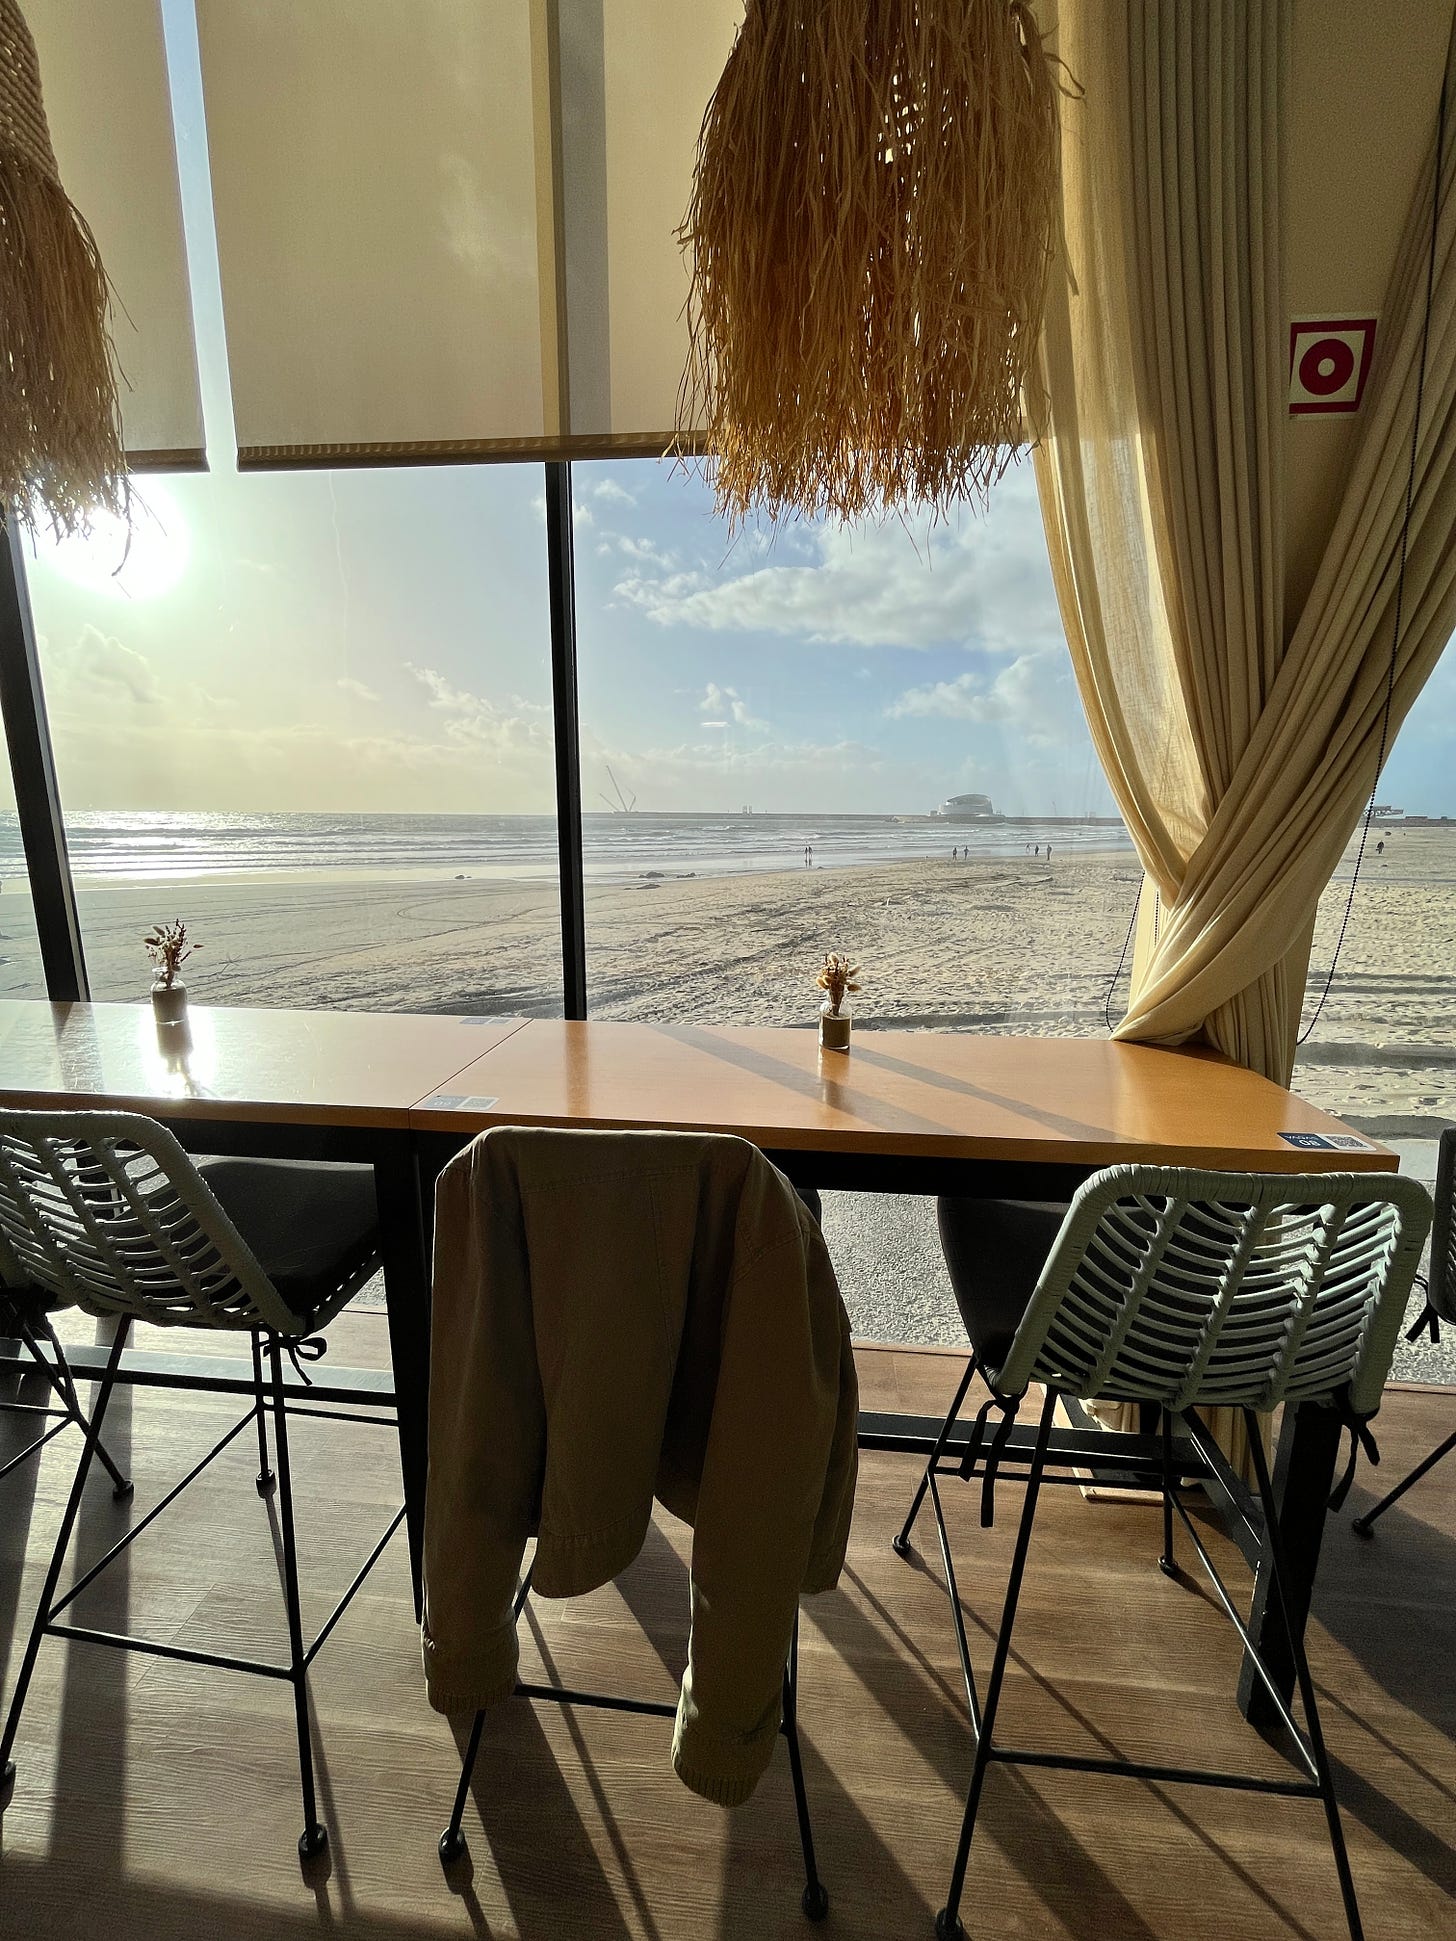 image: a long bench table overlooking the ocean view in Matosinhos Beach, Porto